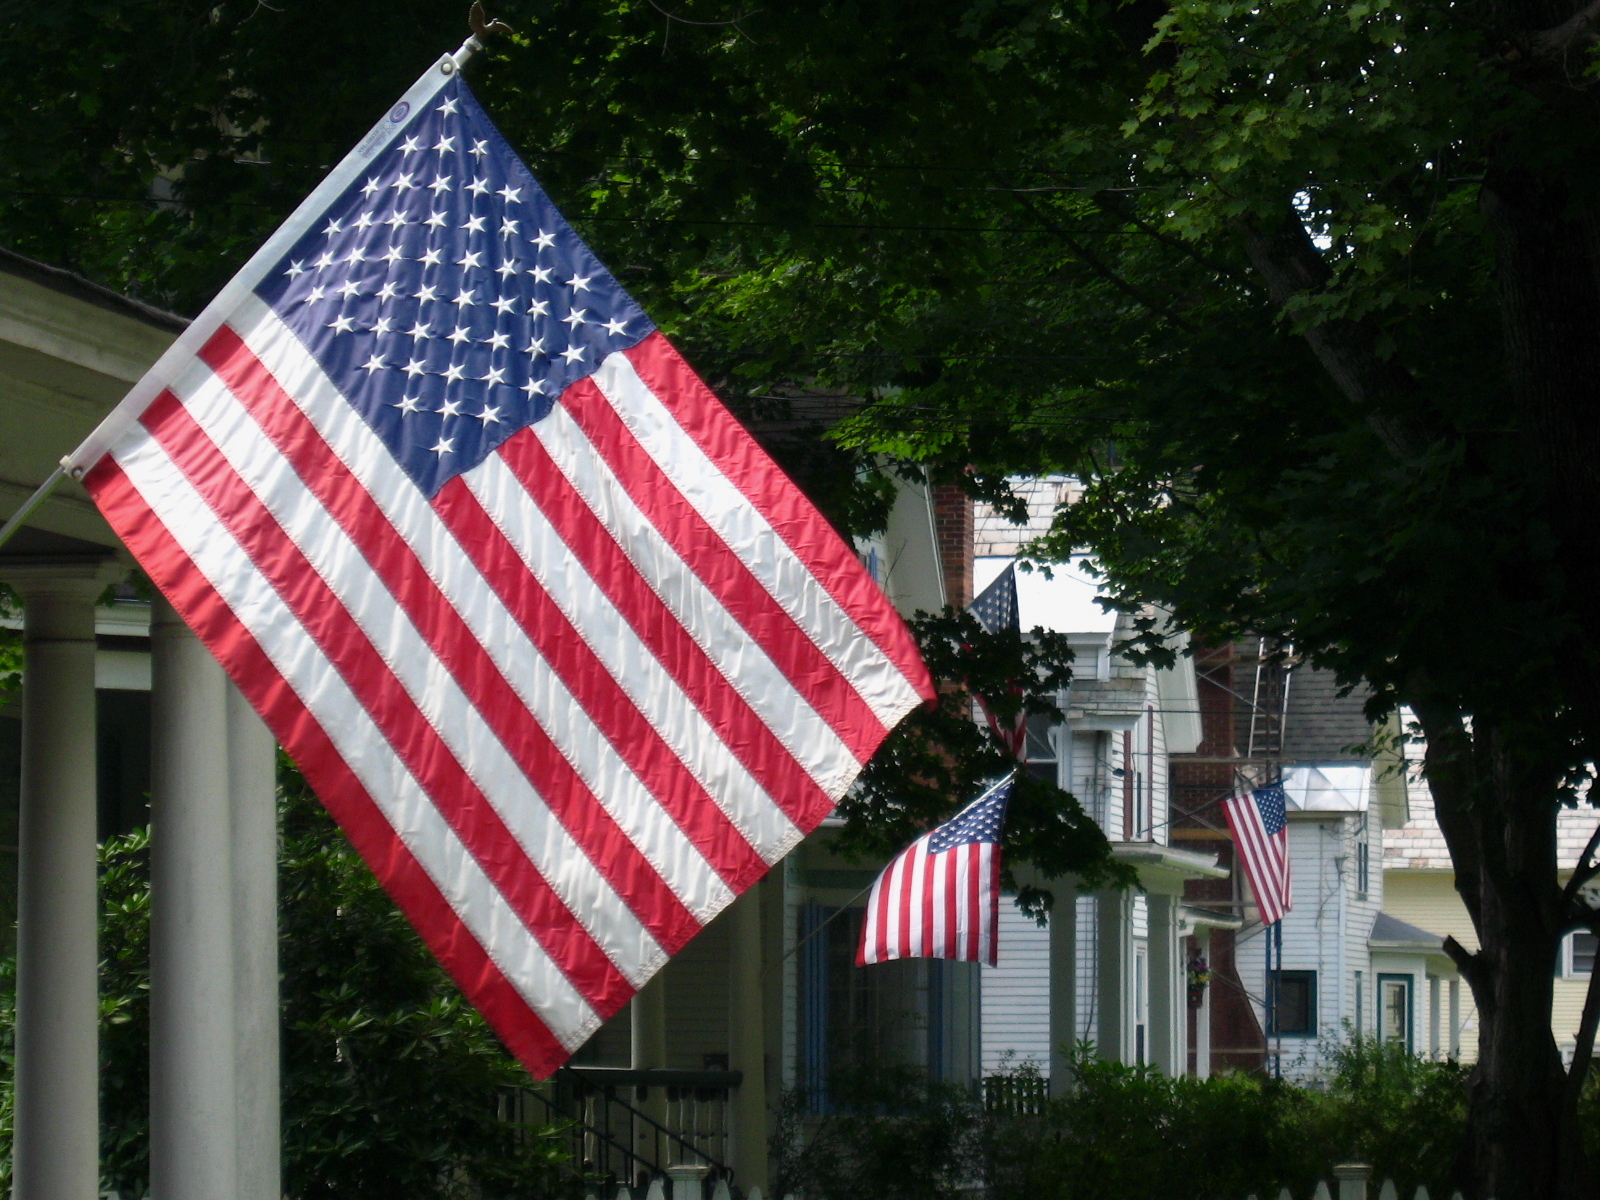 American flags blowing in the breeze in an old New England rural neighborhood